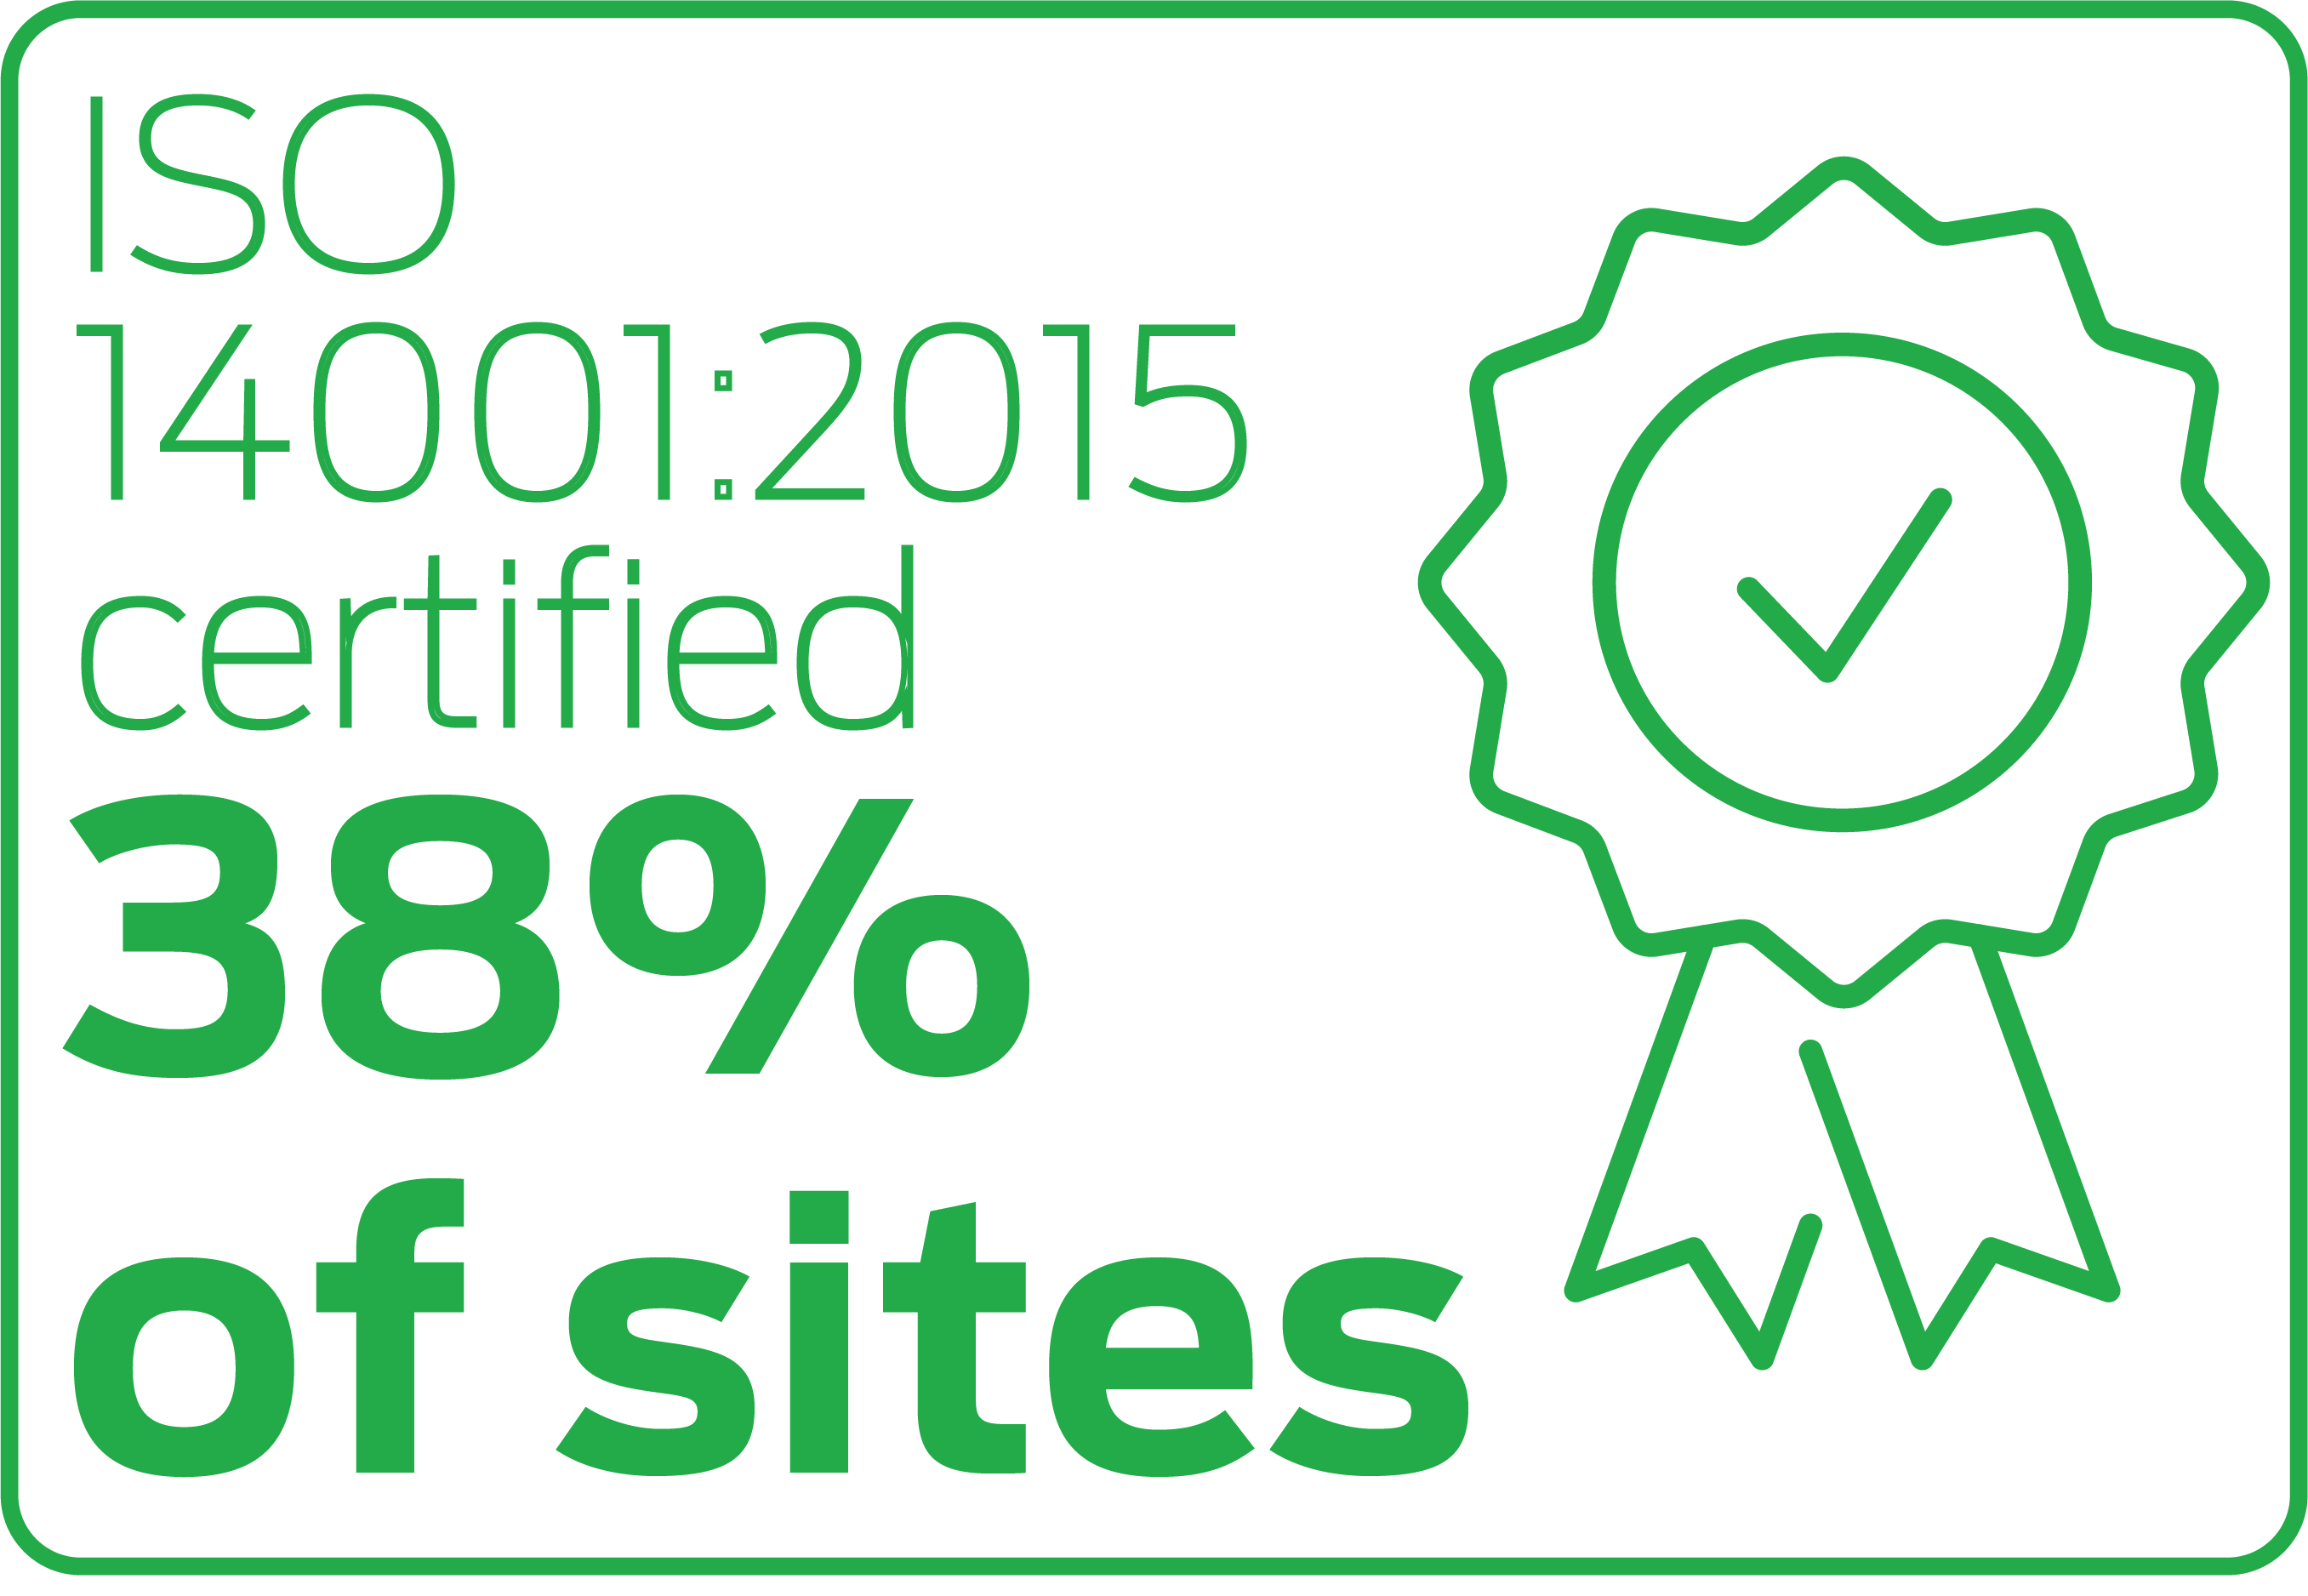 ISO 14001:2015 certified 38% of sites